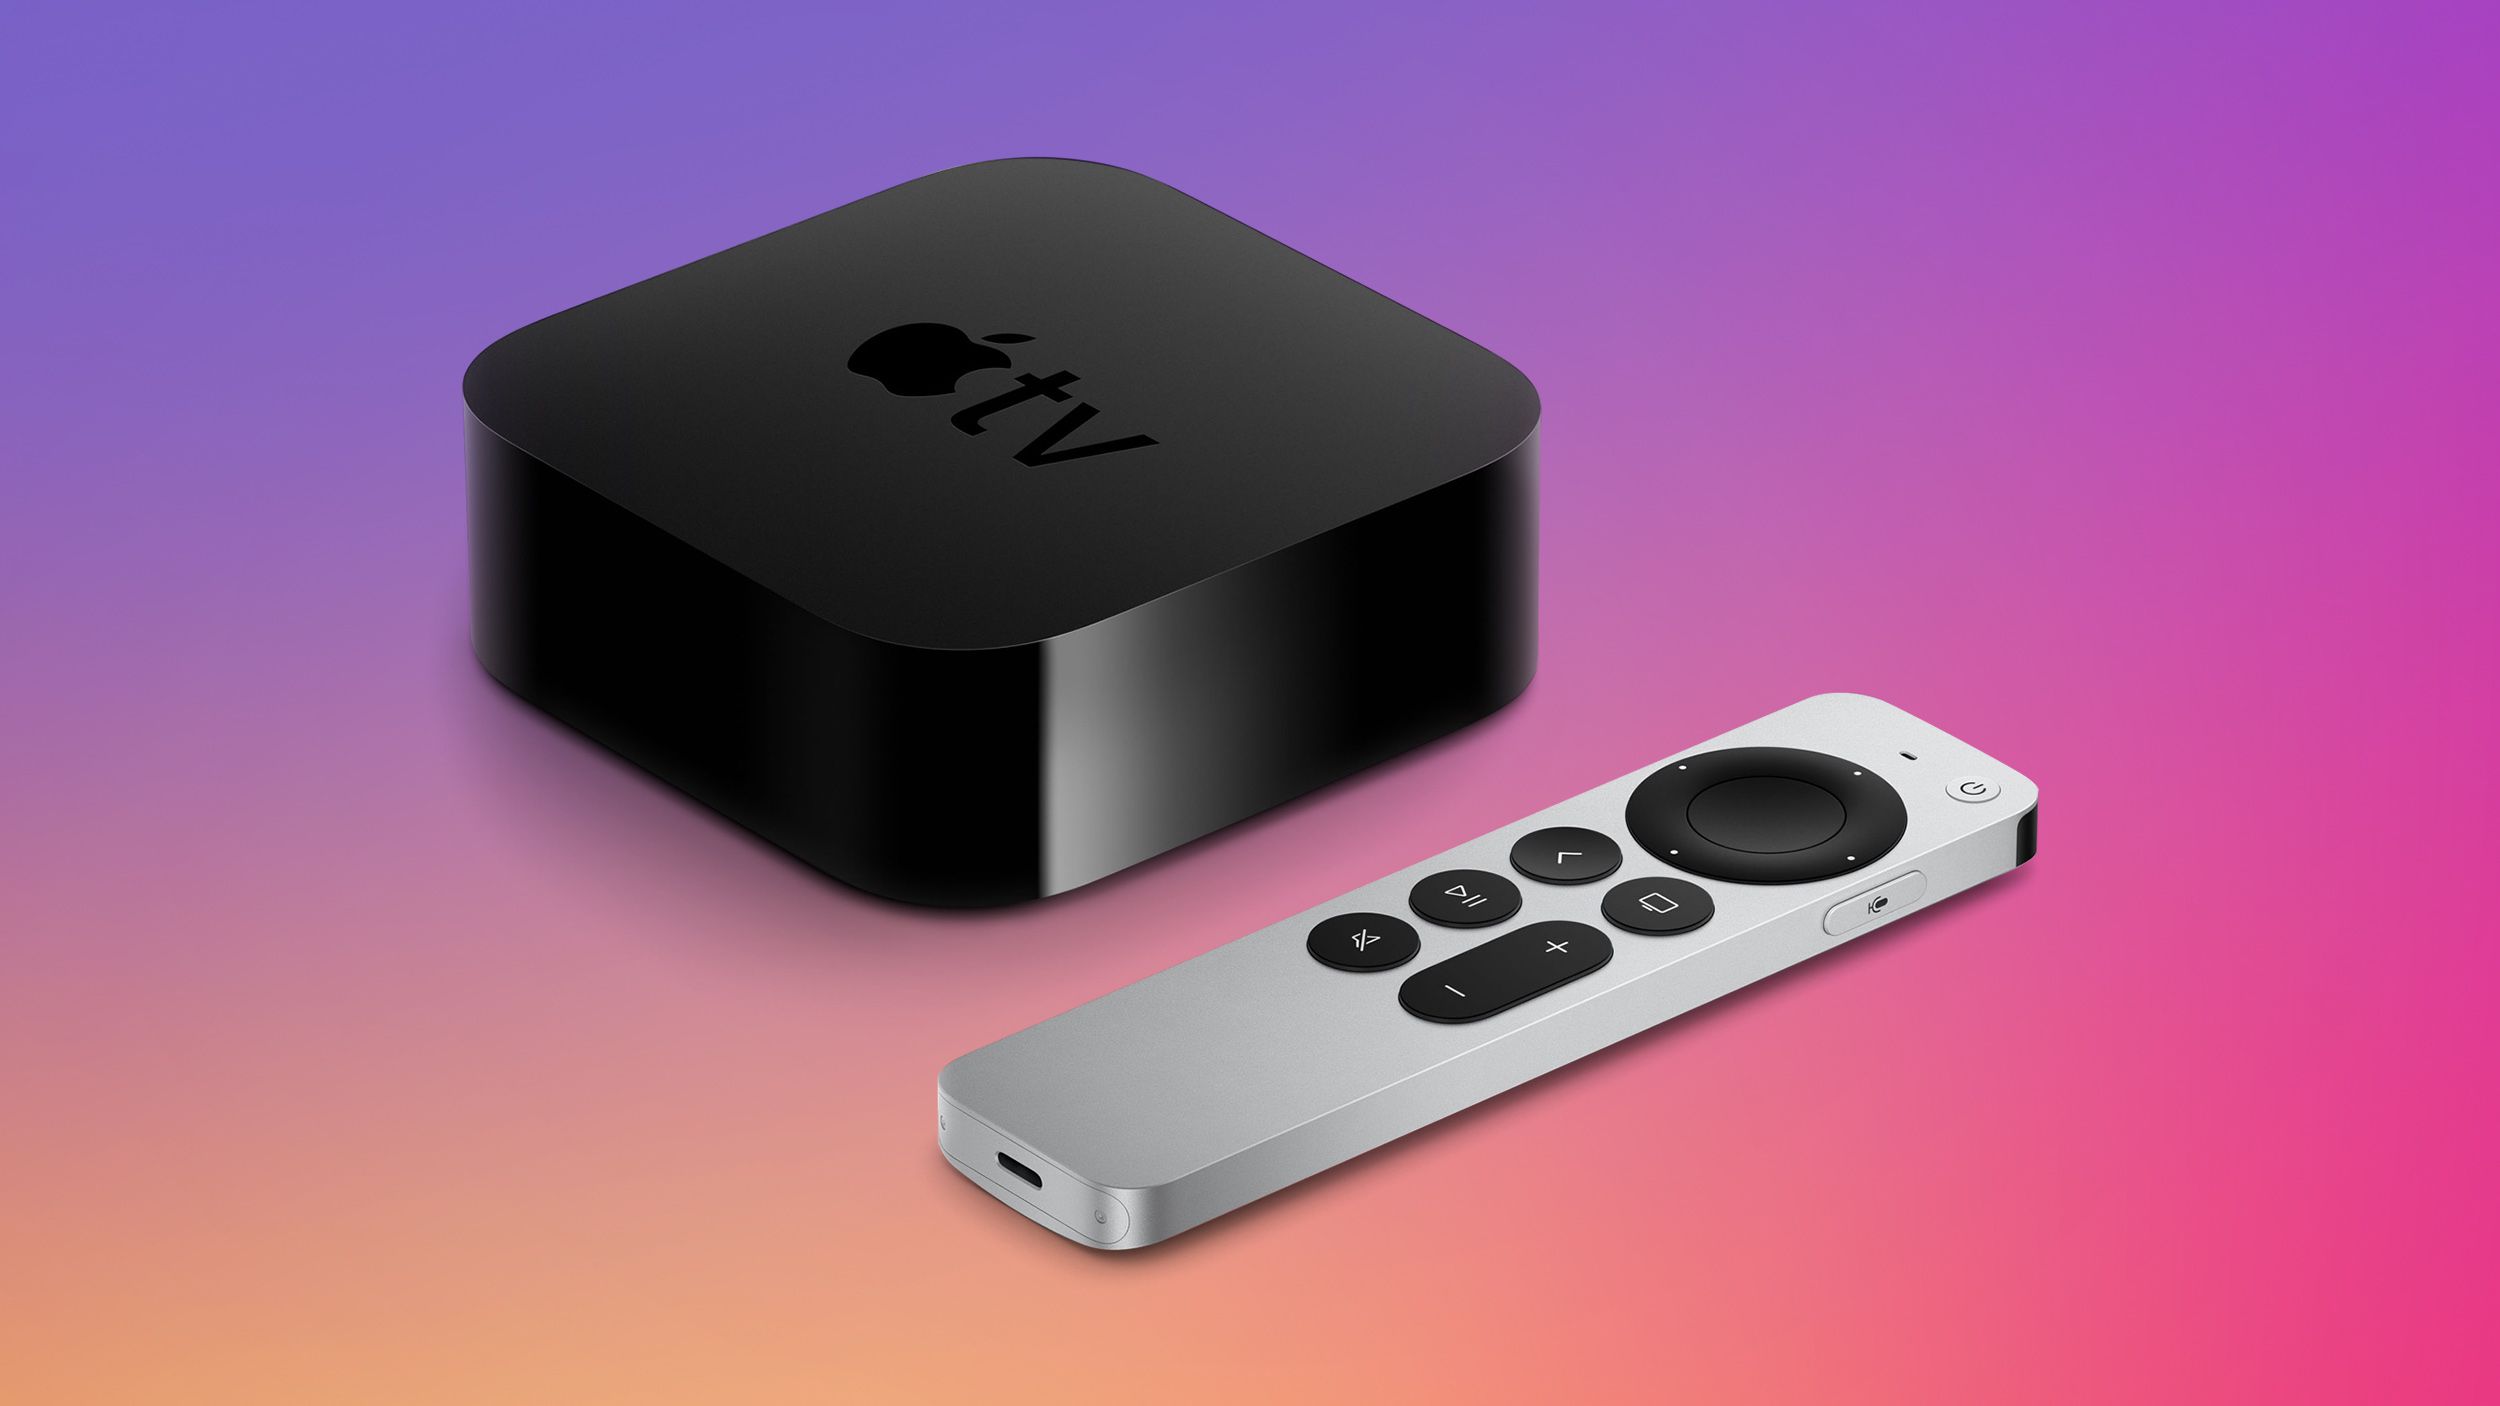 landing Mentor Regnskab What's New in tvOS 16 for Apple TV: Features and Enhancements - MacRumors